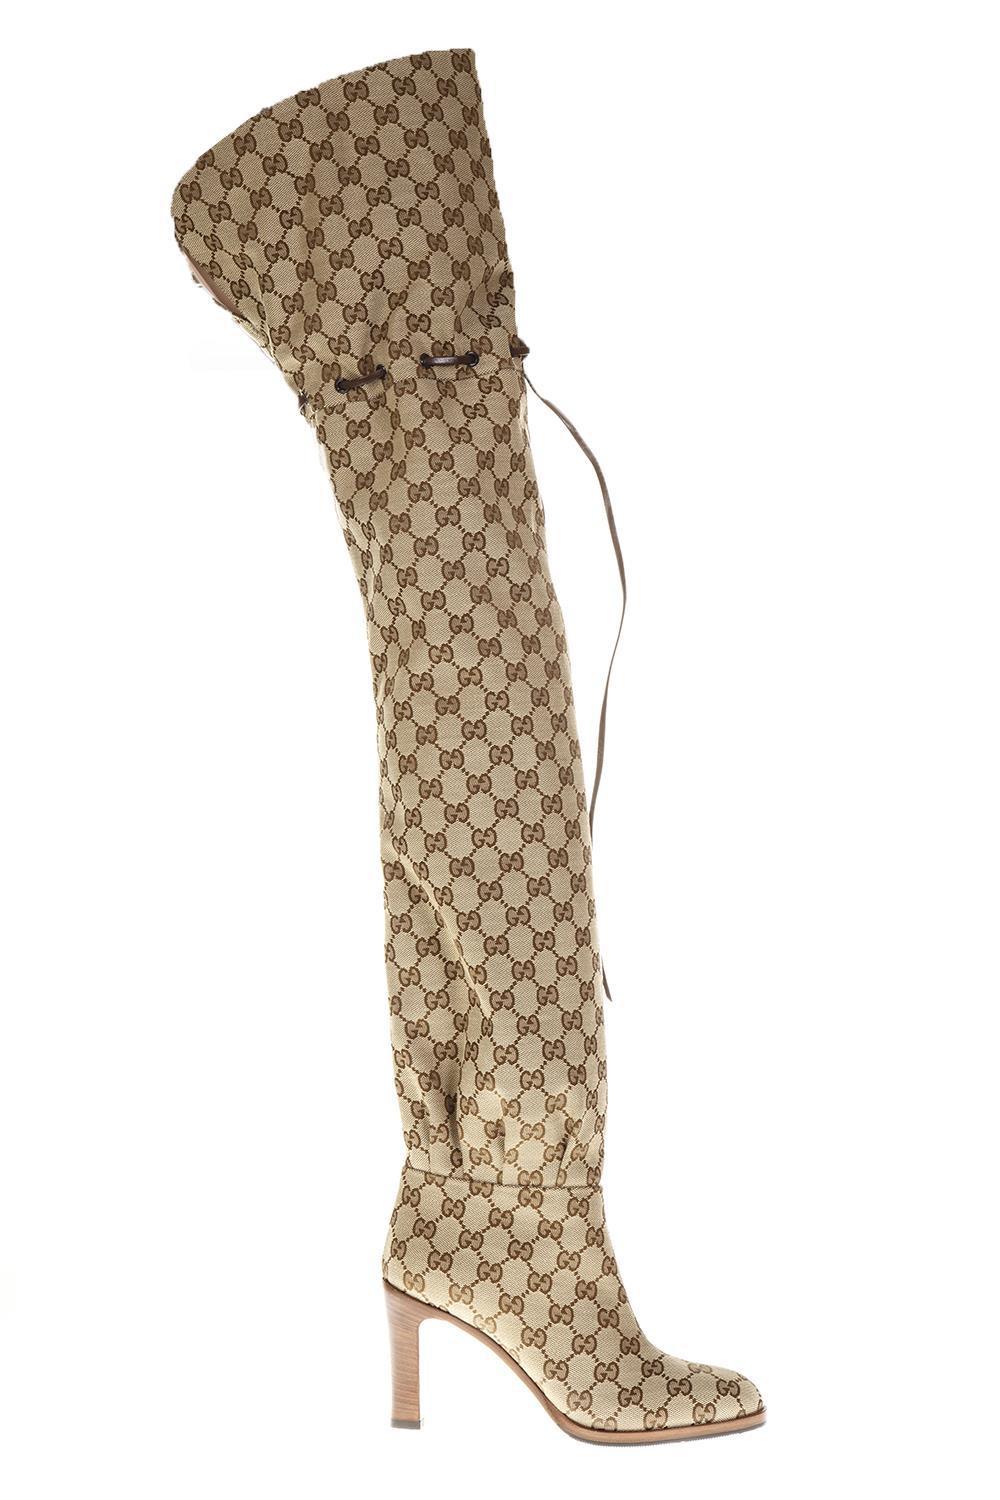 Gucci Original GG Canvas Over-the-knee Boot in Natural | Lyst